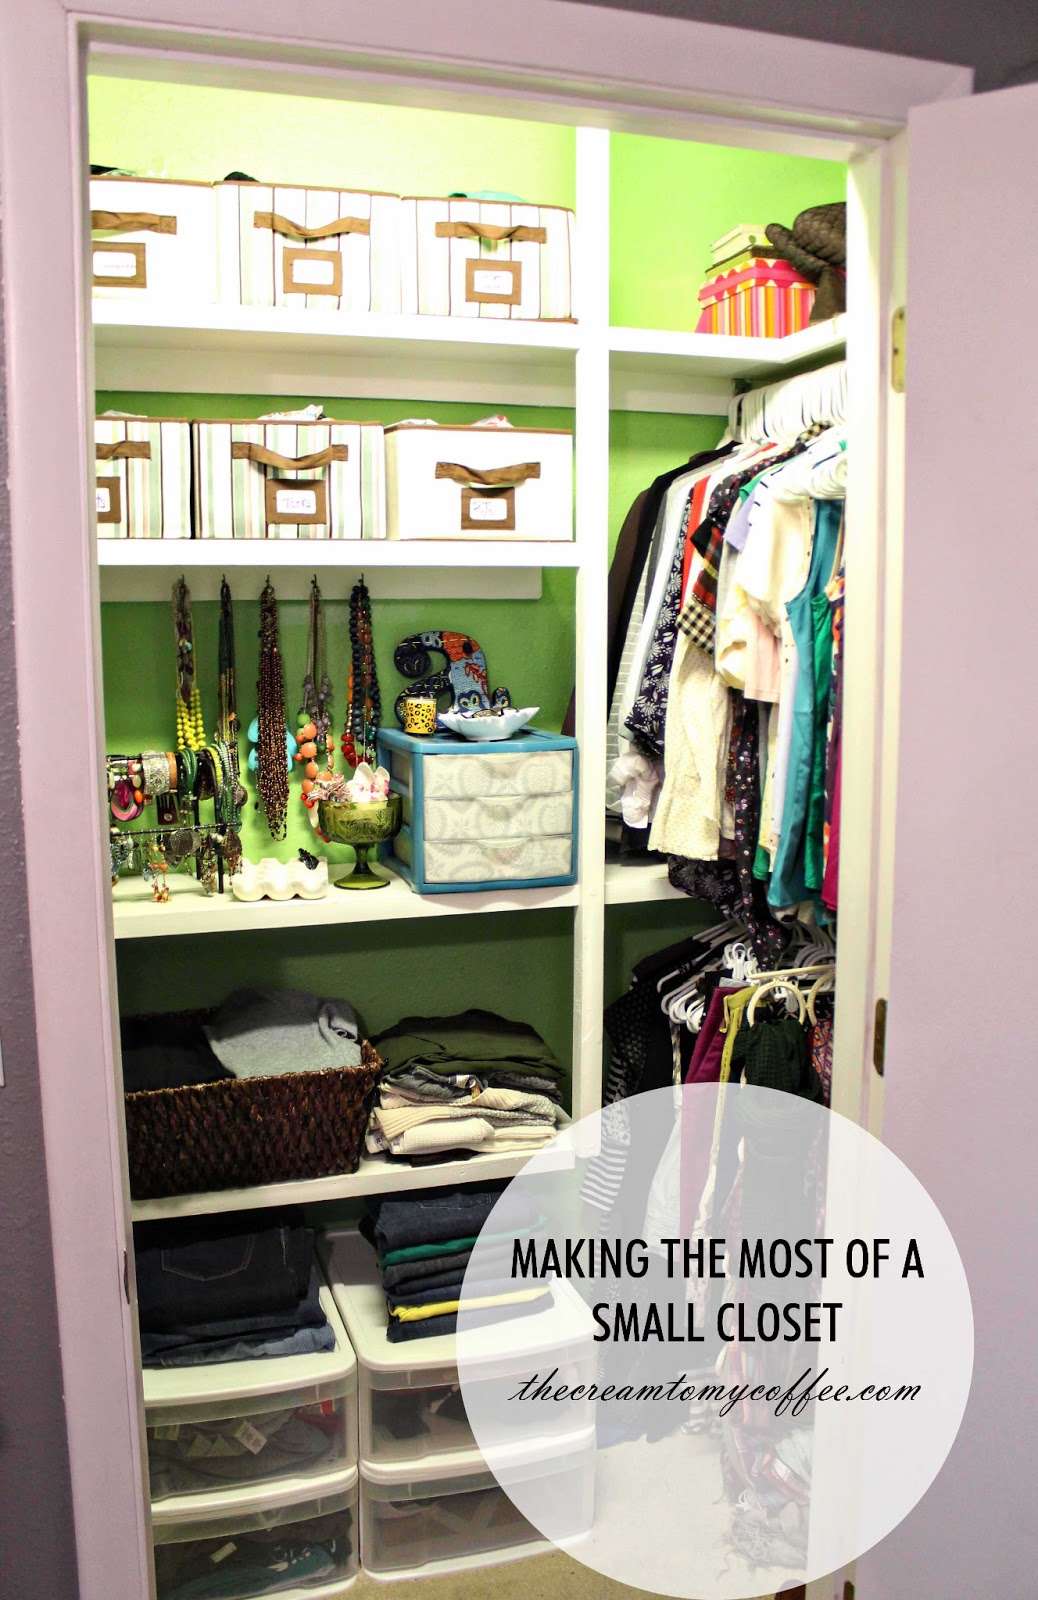 Making the Most of a Small Closet | The Cream to My Coffee